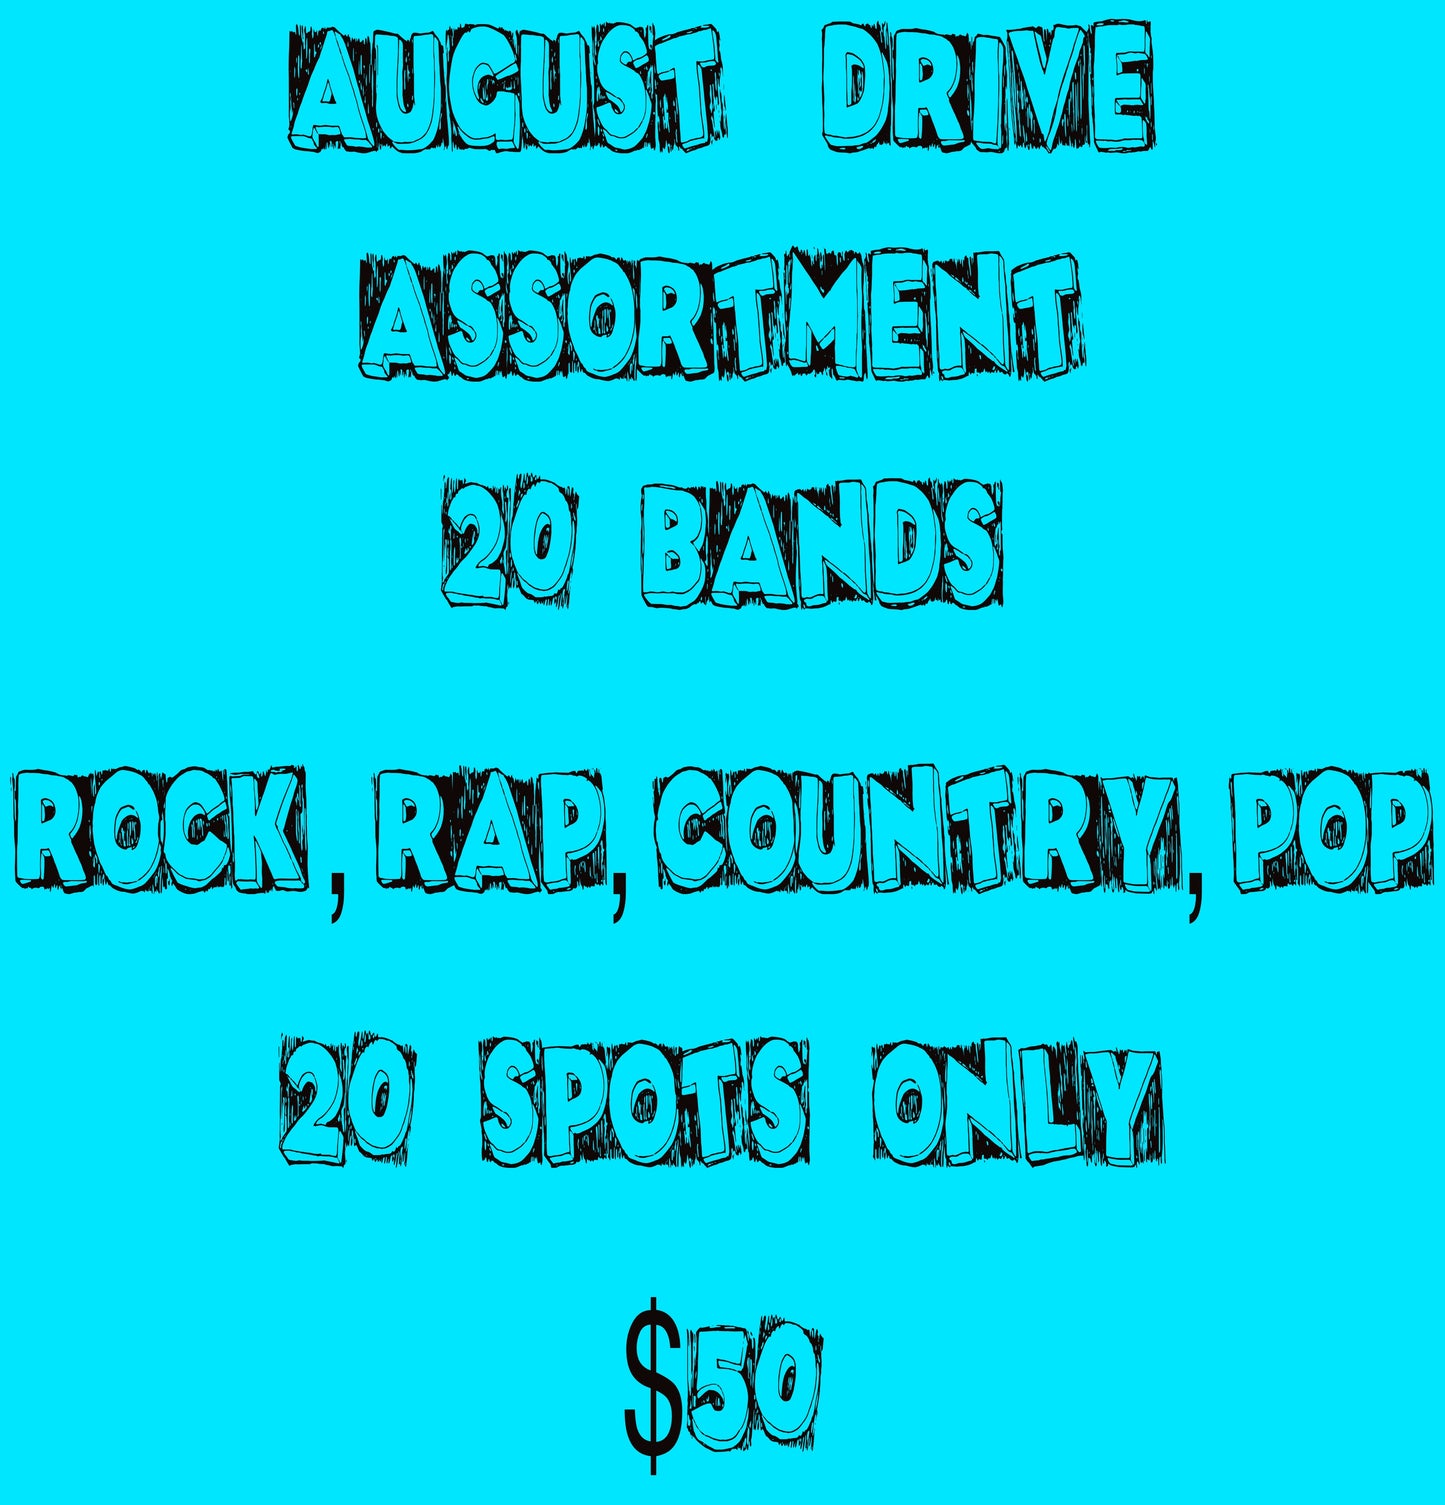 AUGUST DRIVE … BANDS  20 DESIGNS